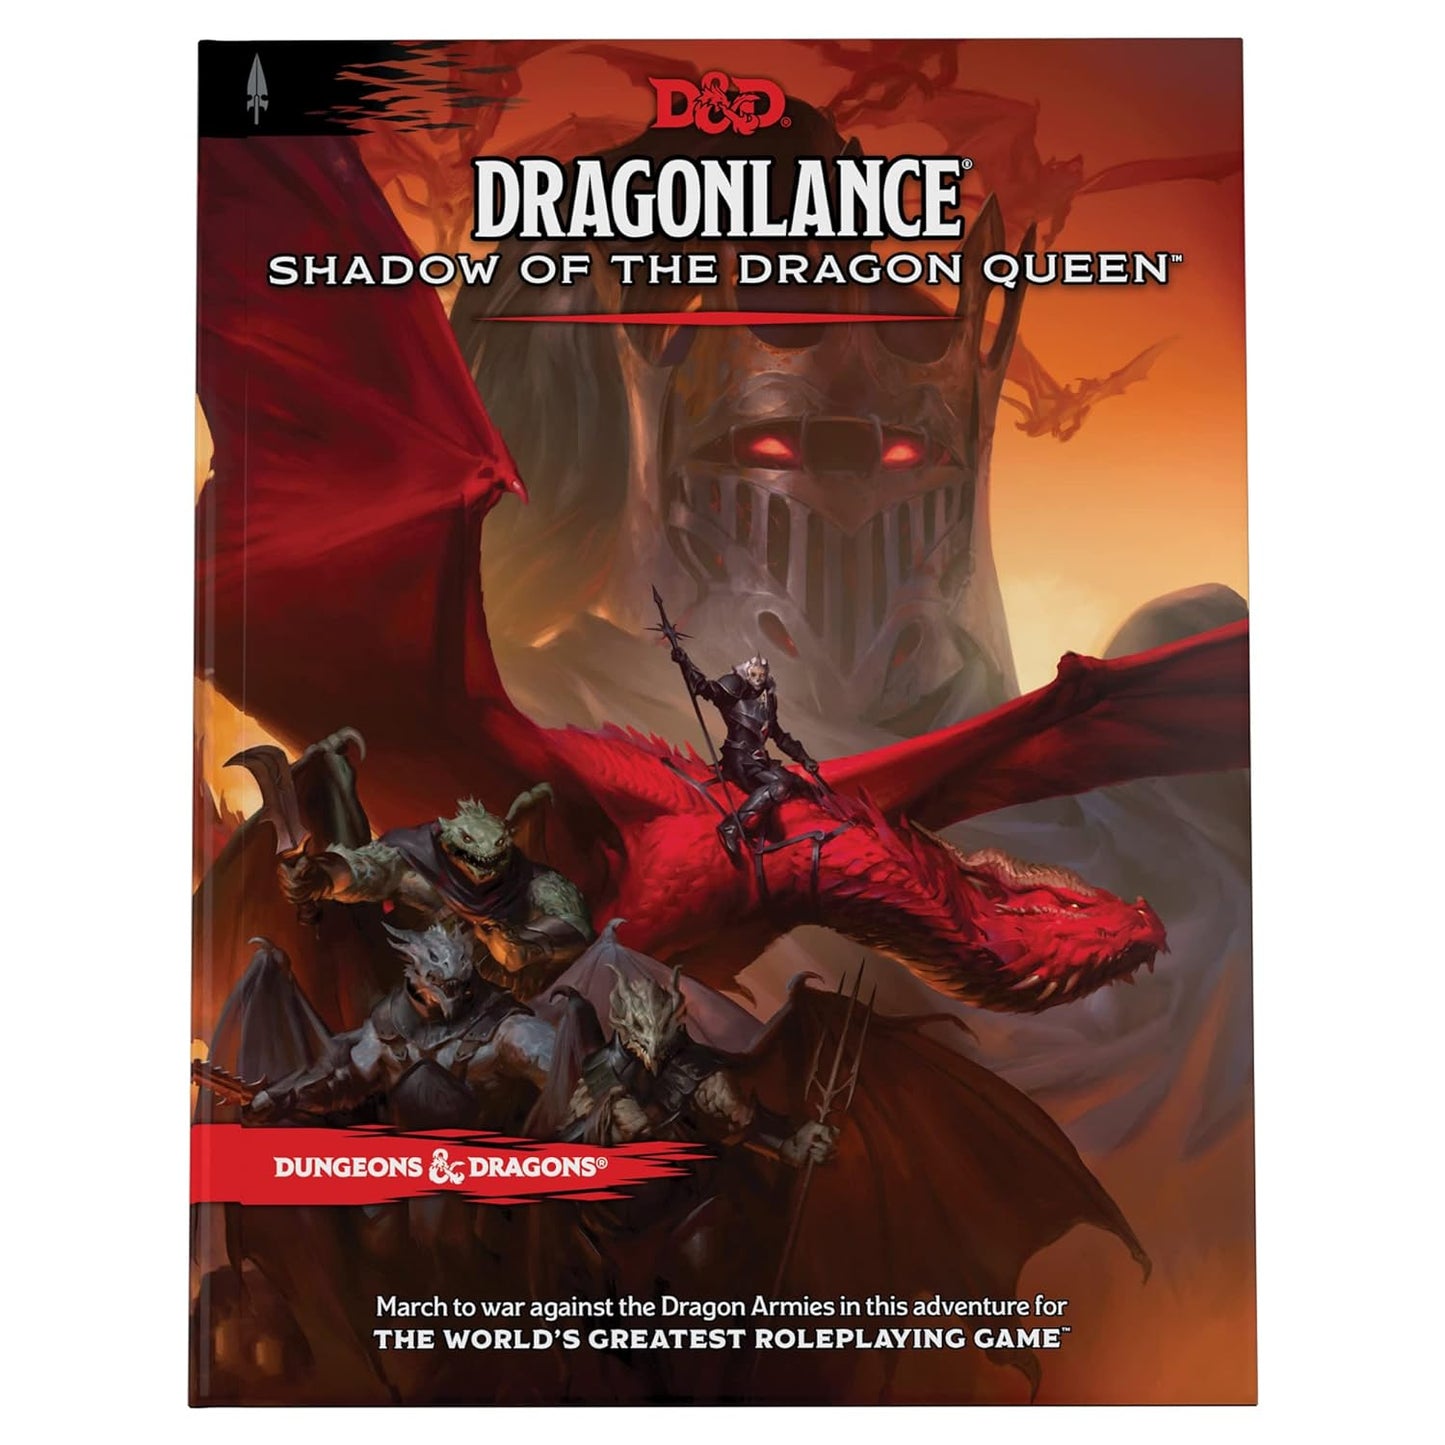 Dragonlance: Shadow of the Dragon Queen (D&D)